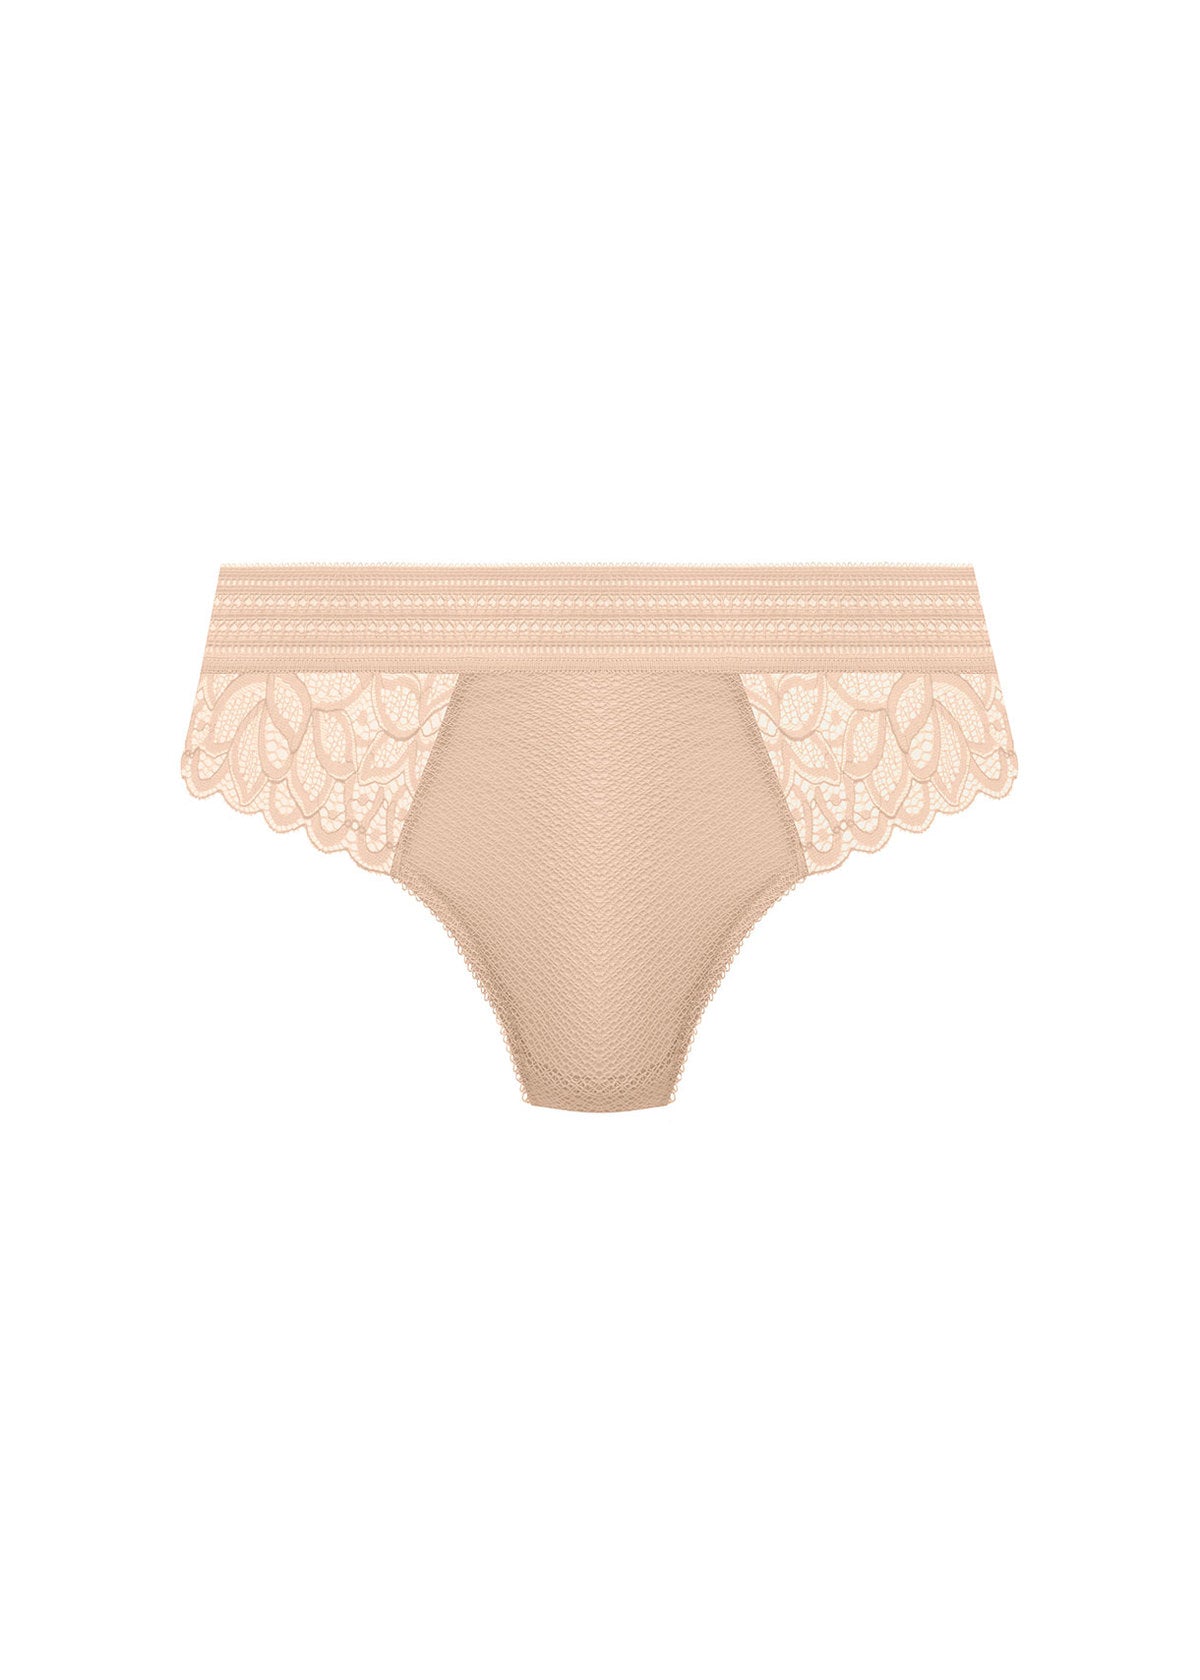 Pretty Things Raffine Lace Thong - Underwear Specialists